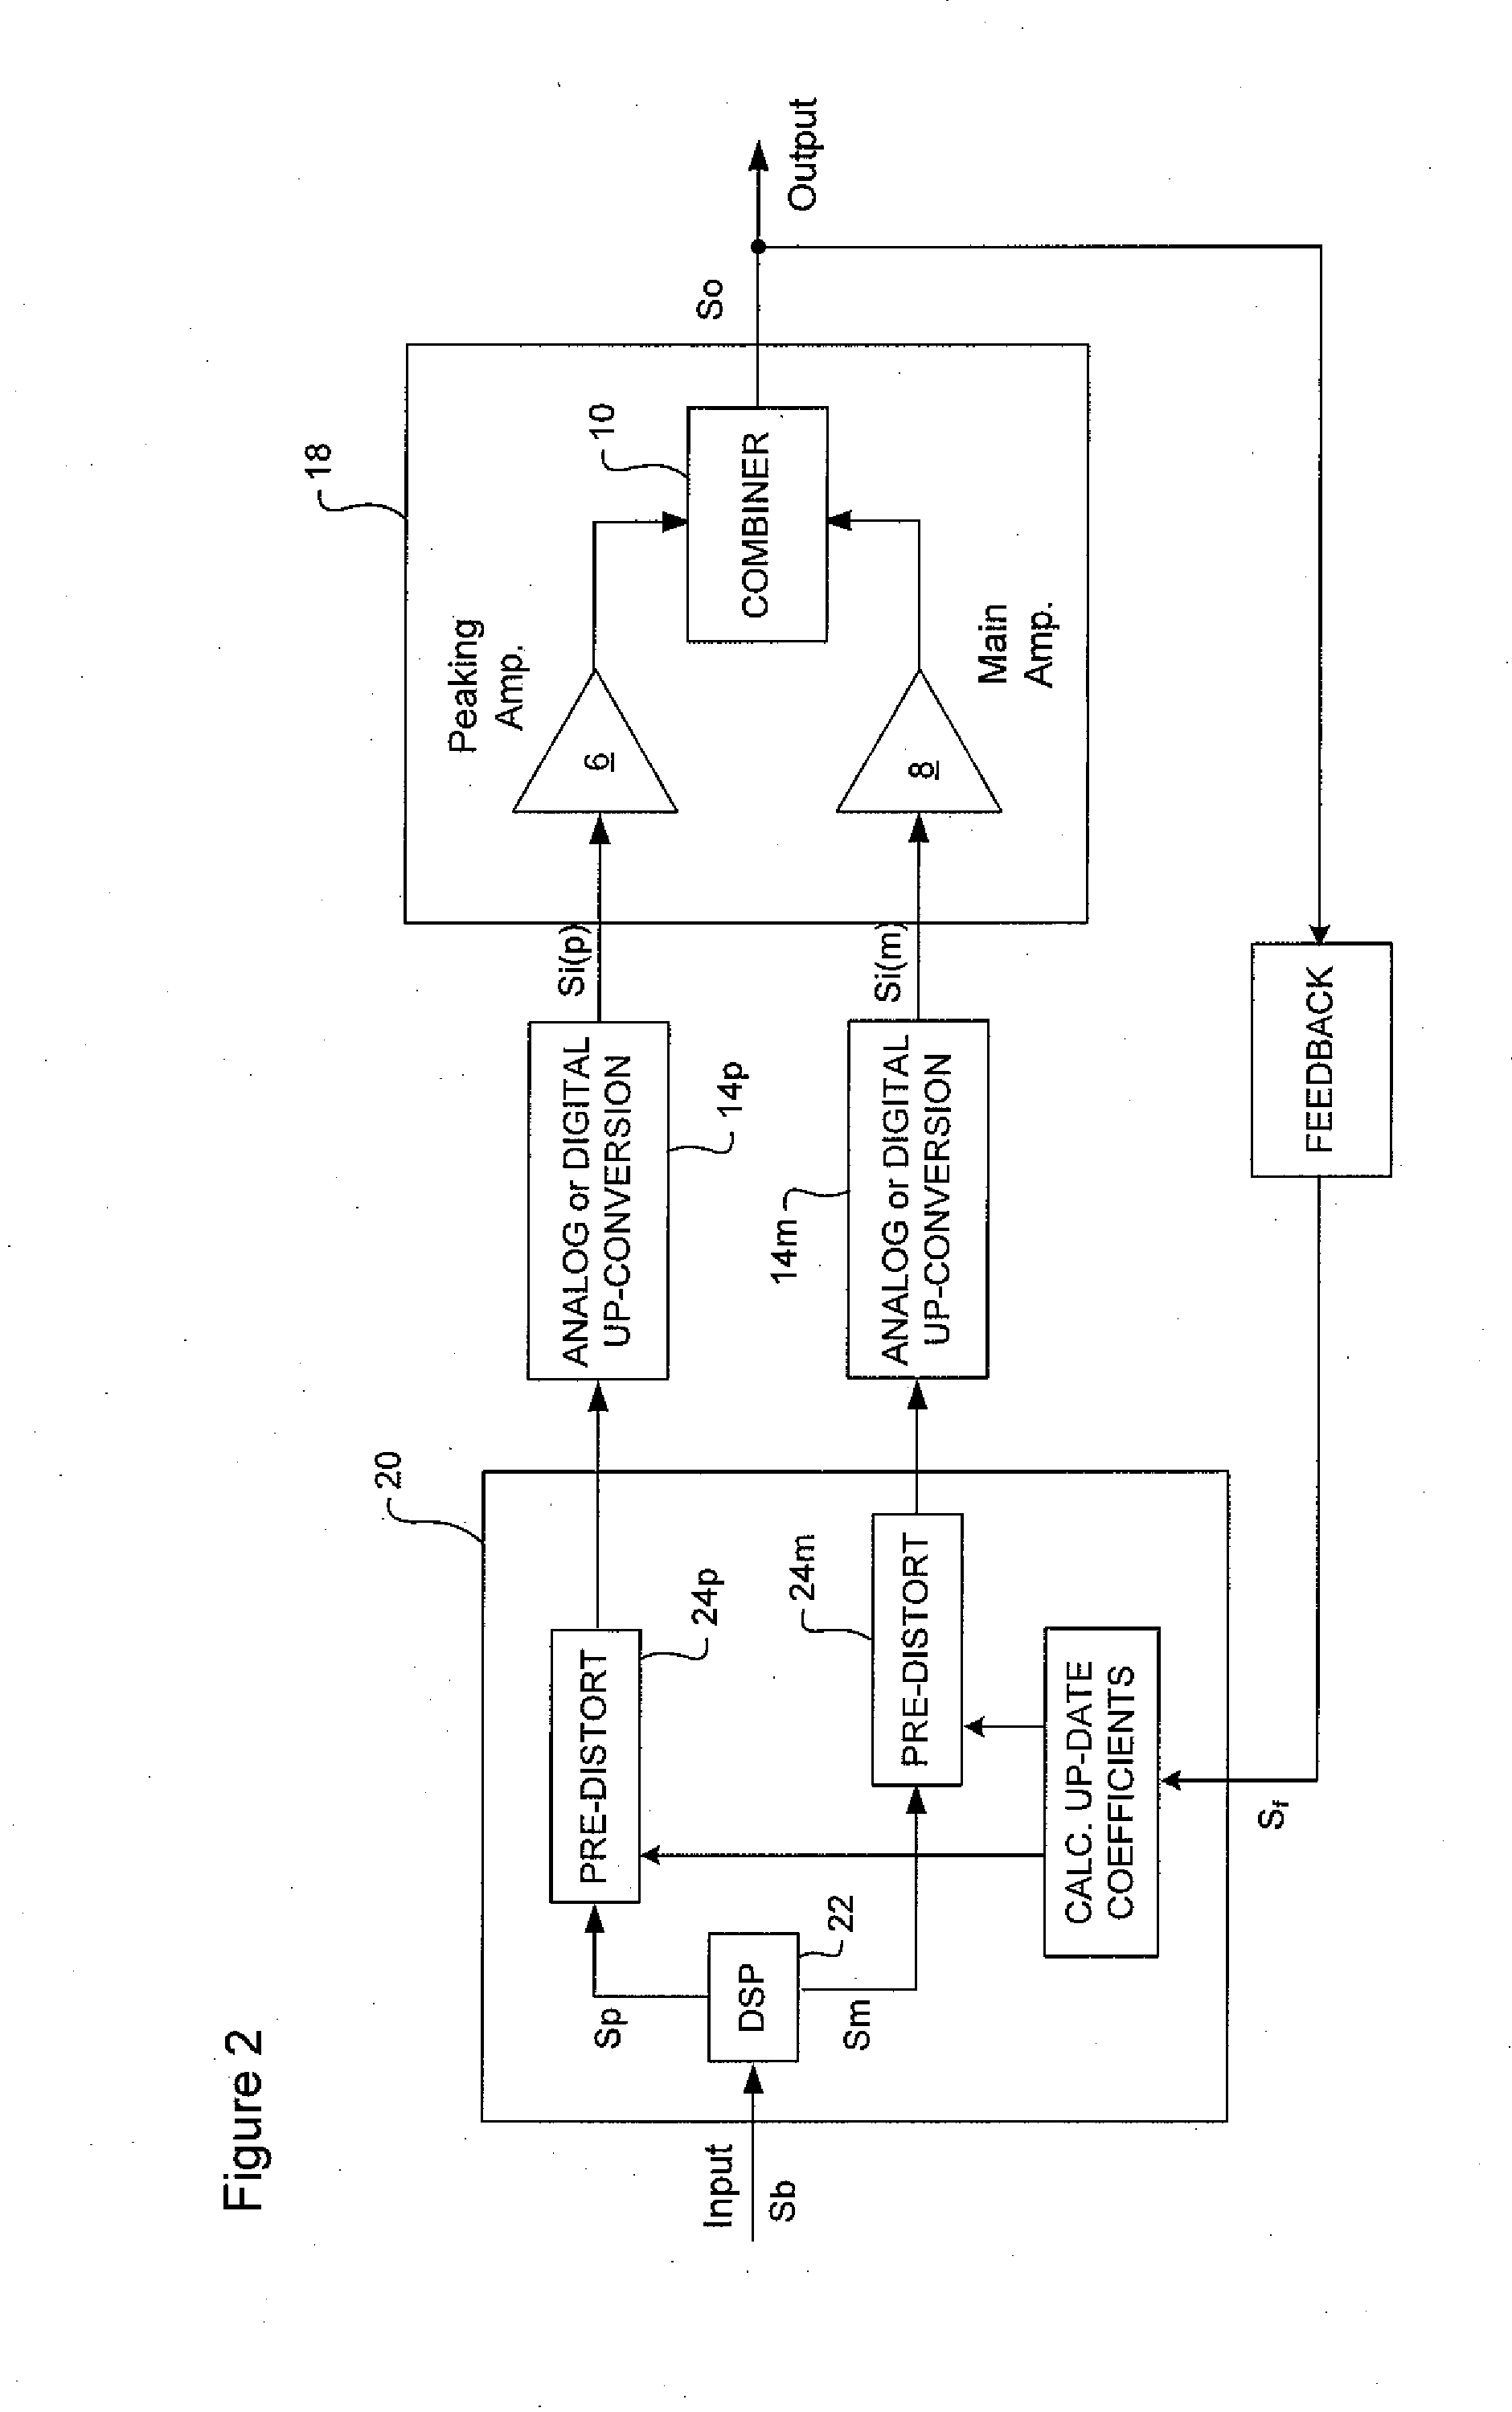 Amplifier pre-distortion systems and methods